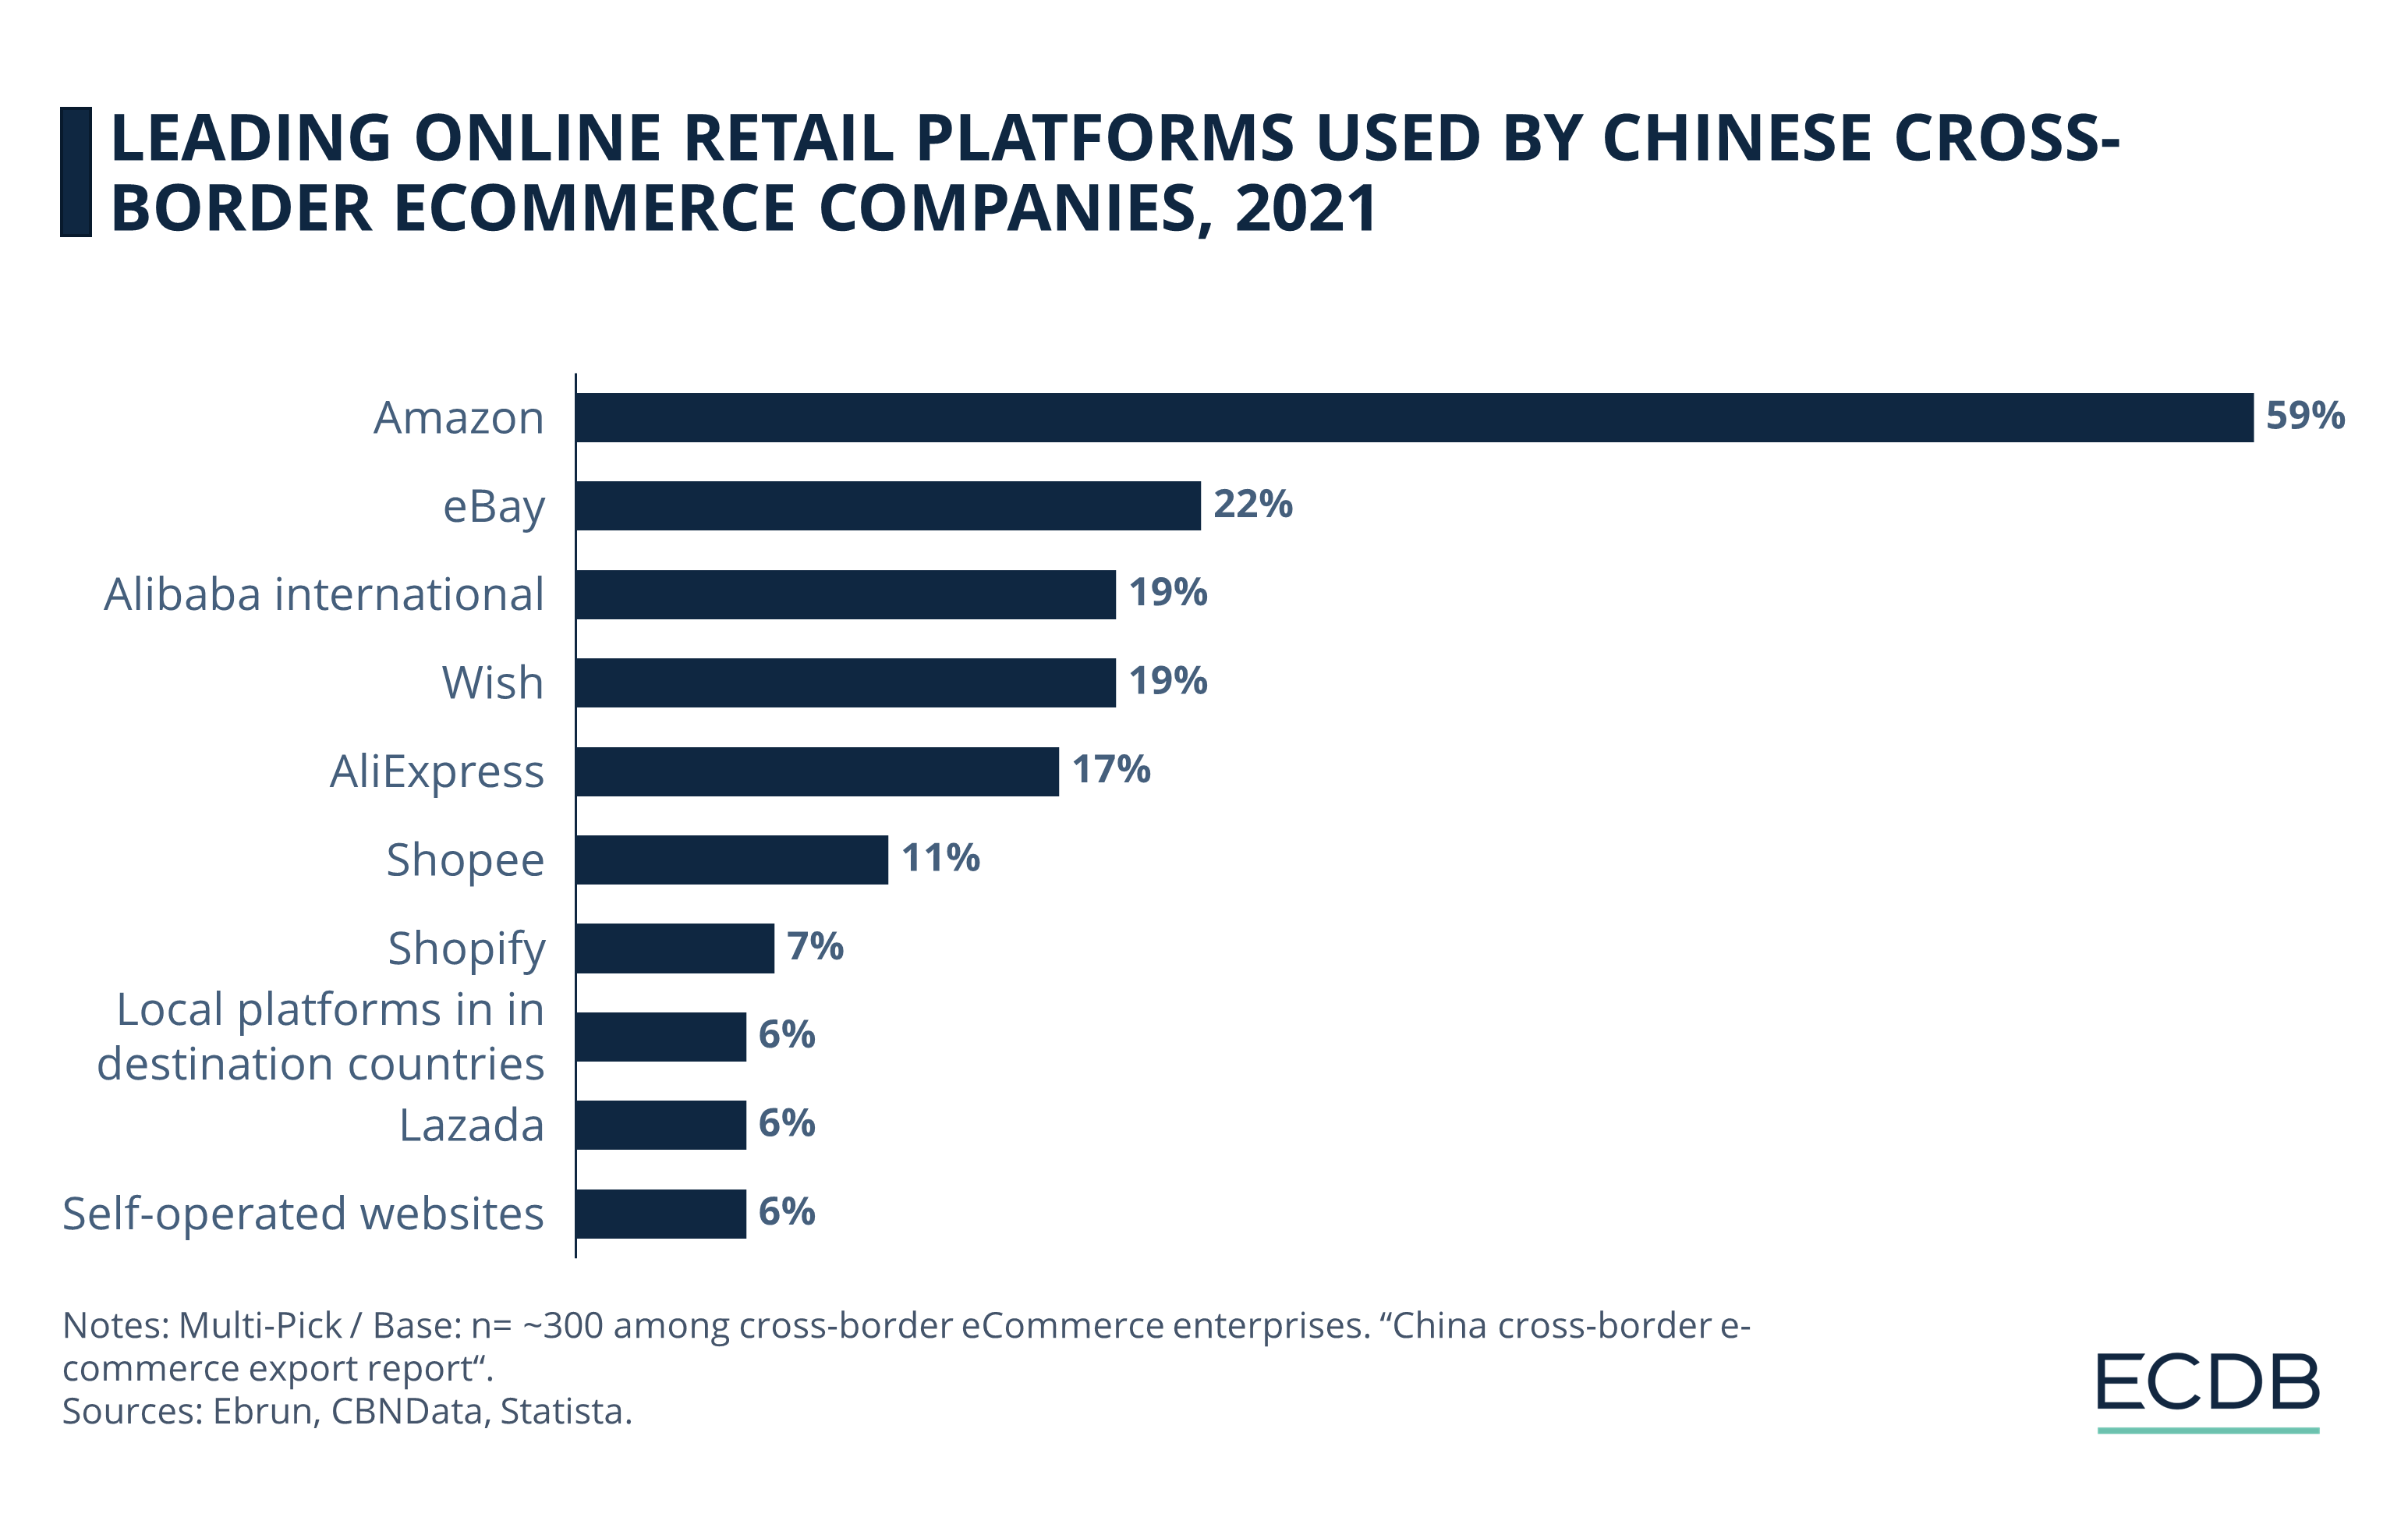 Leading Online Retail Platforms Used by Chinese Cross-Border eCommerce Companies, 2021